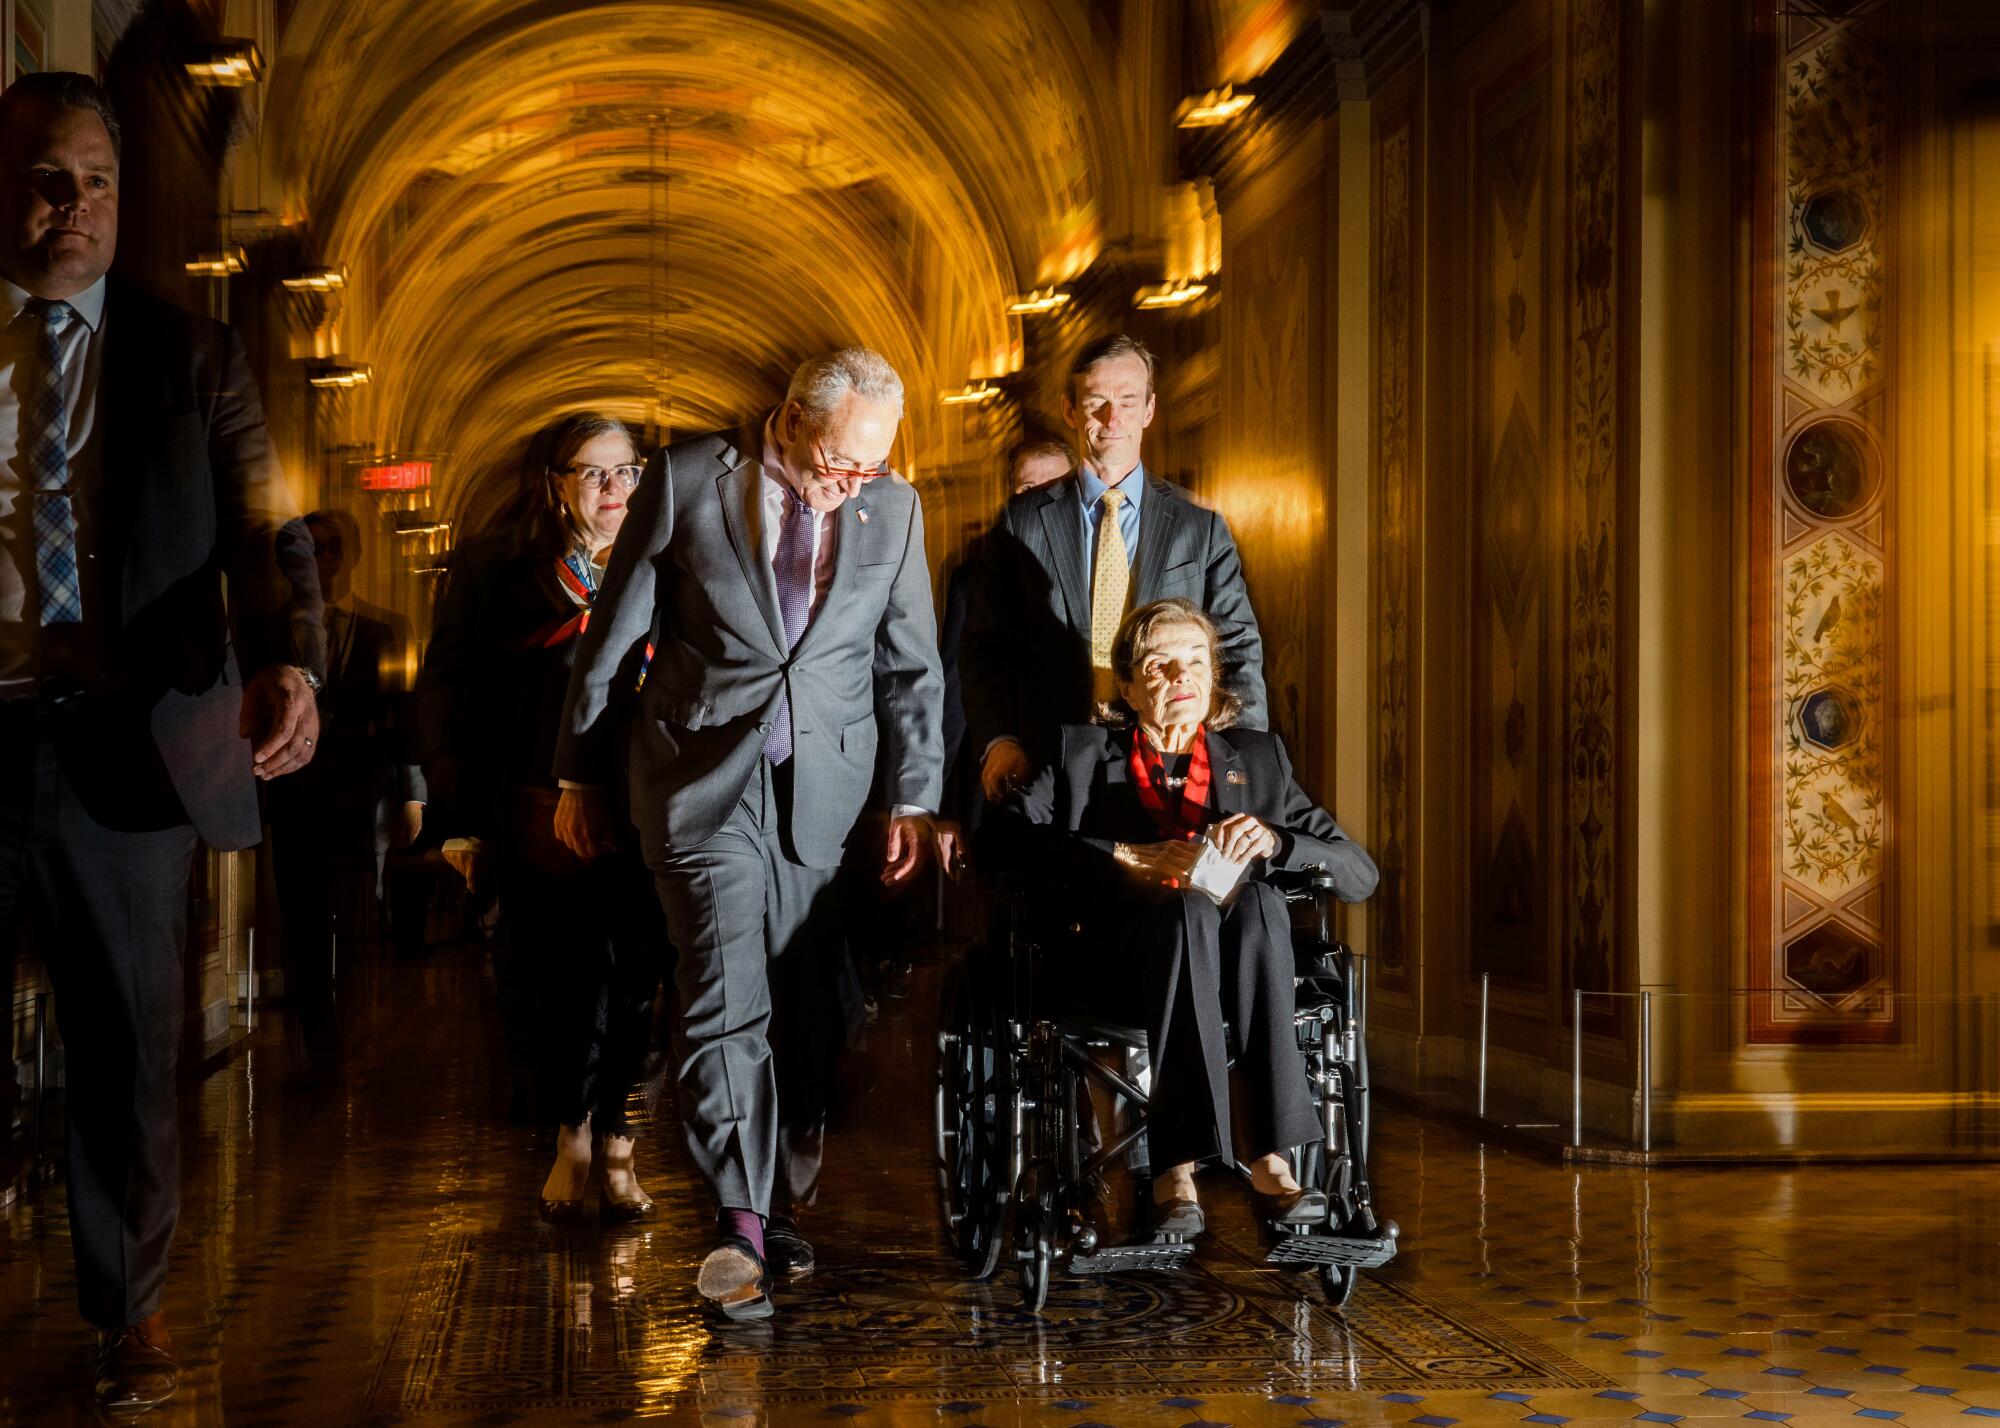 A person pushes another person in a wheelchair in an ornate hallway as others walk nearby.